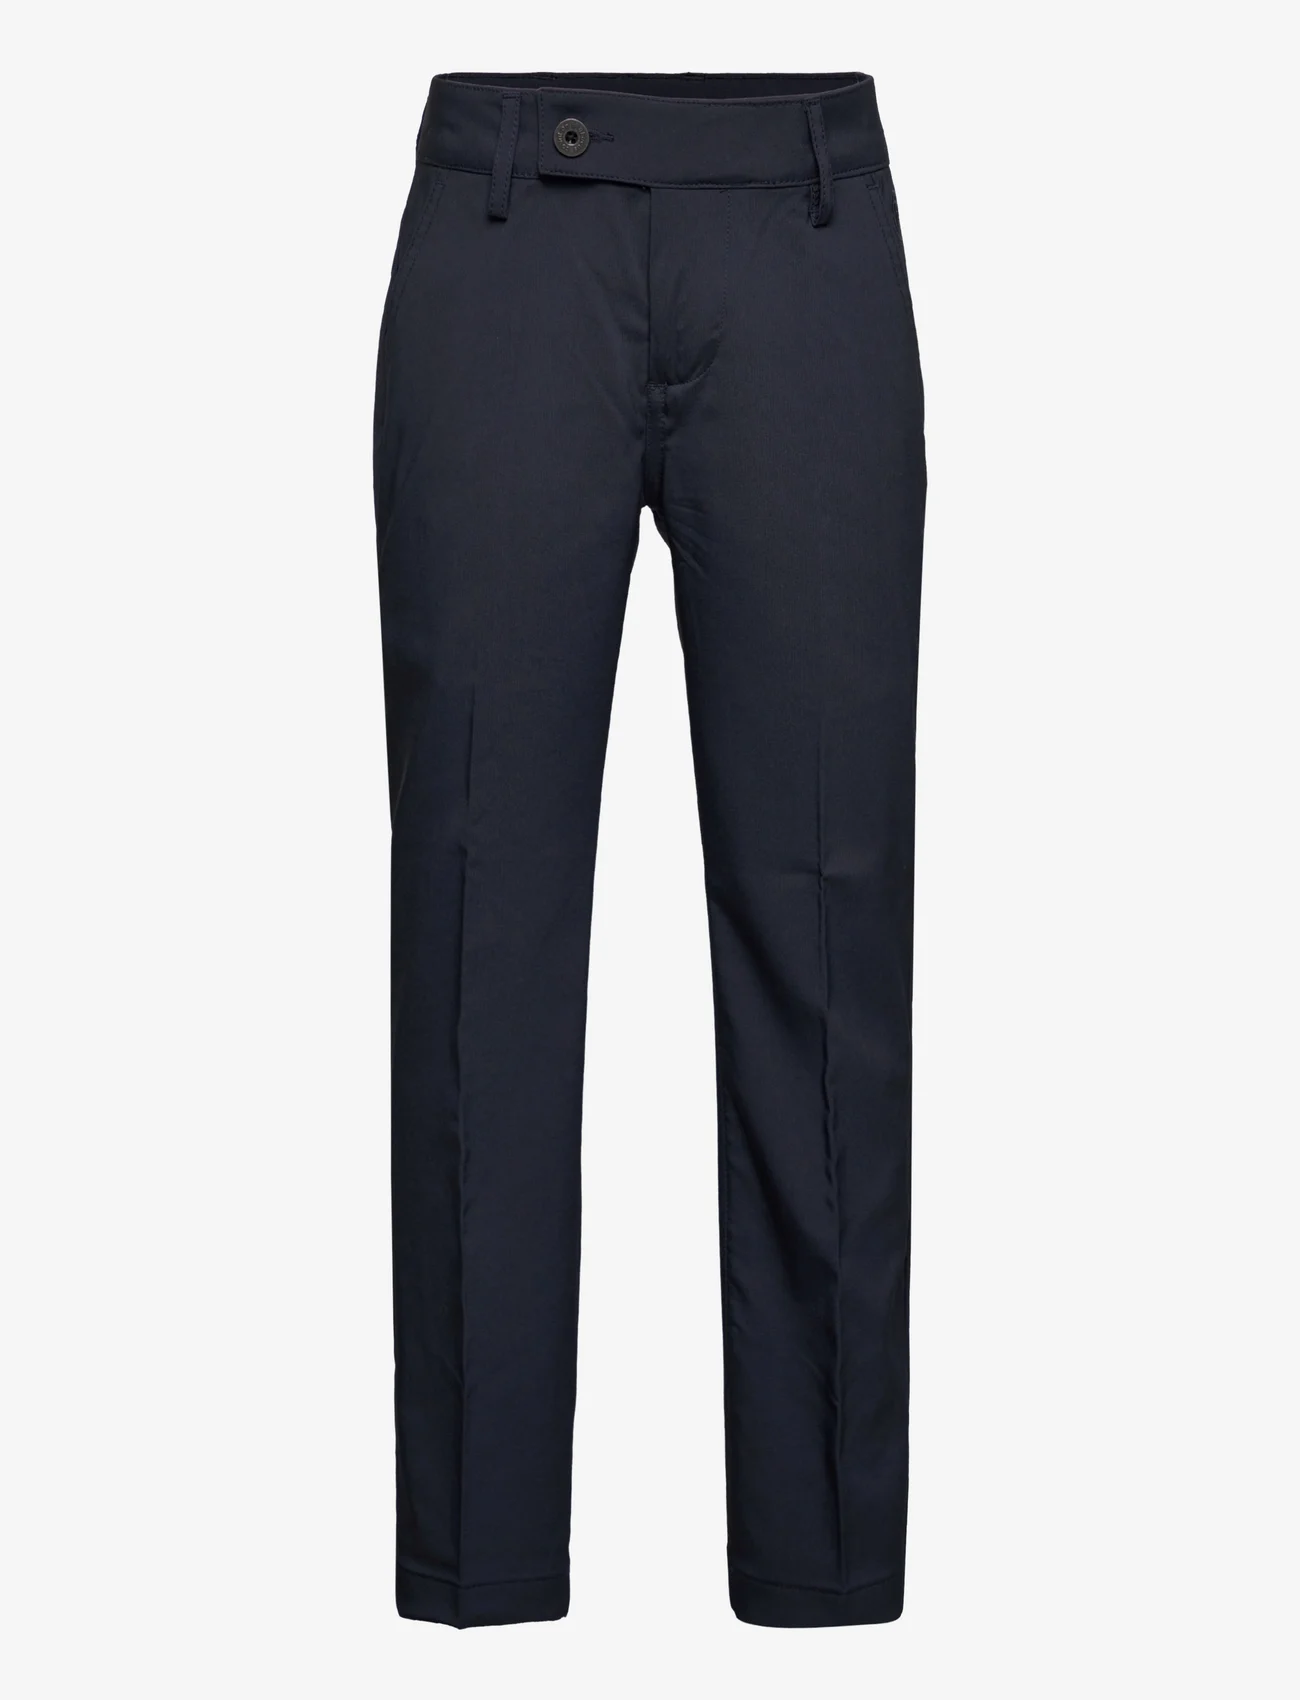 Abacus - Jr Cleek stretch trousers - navy - 0